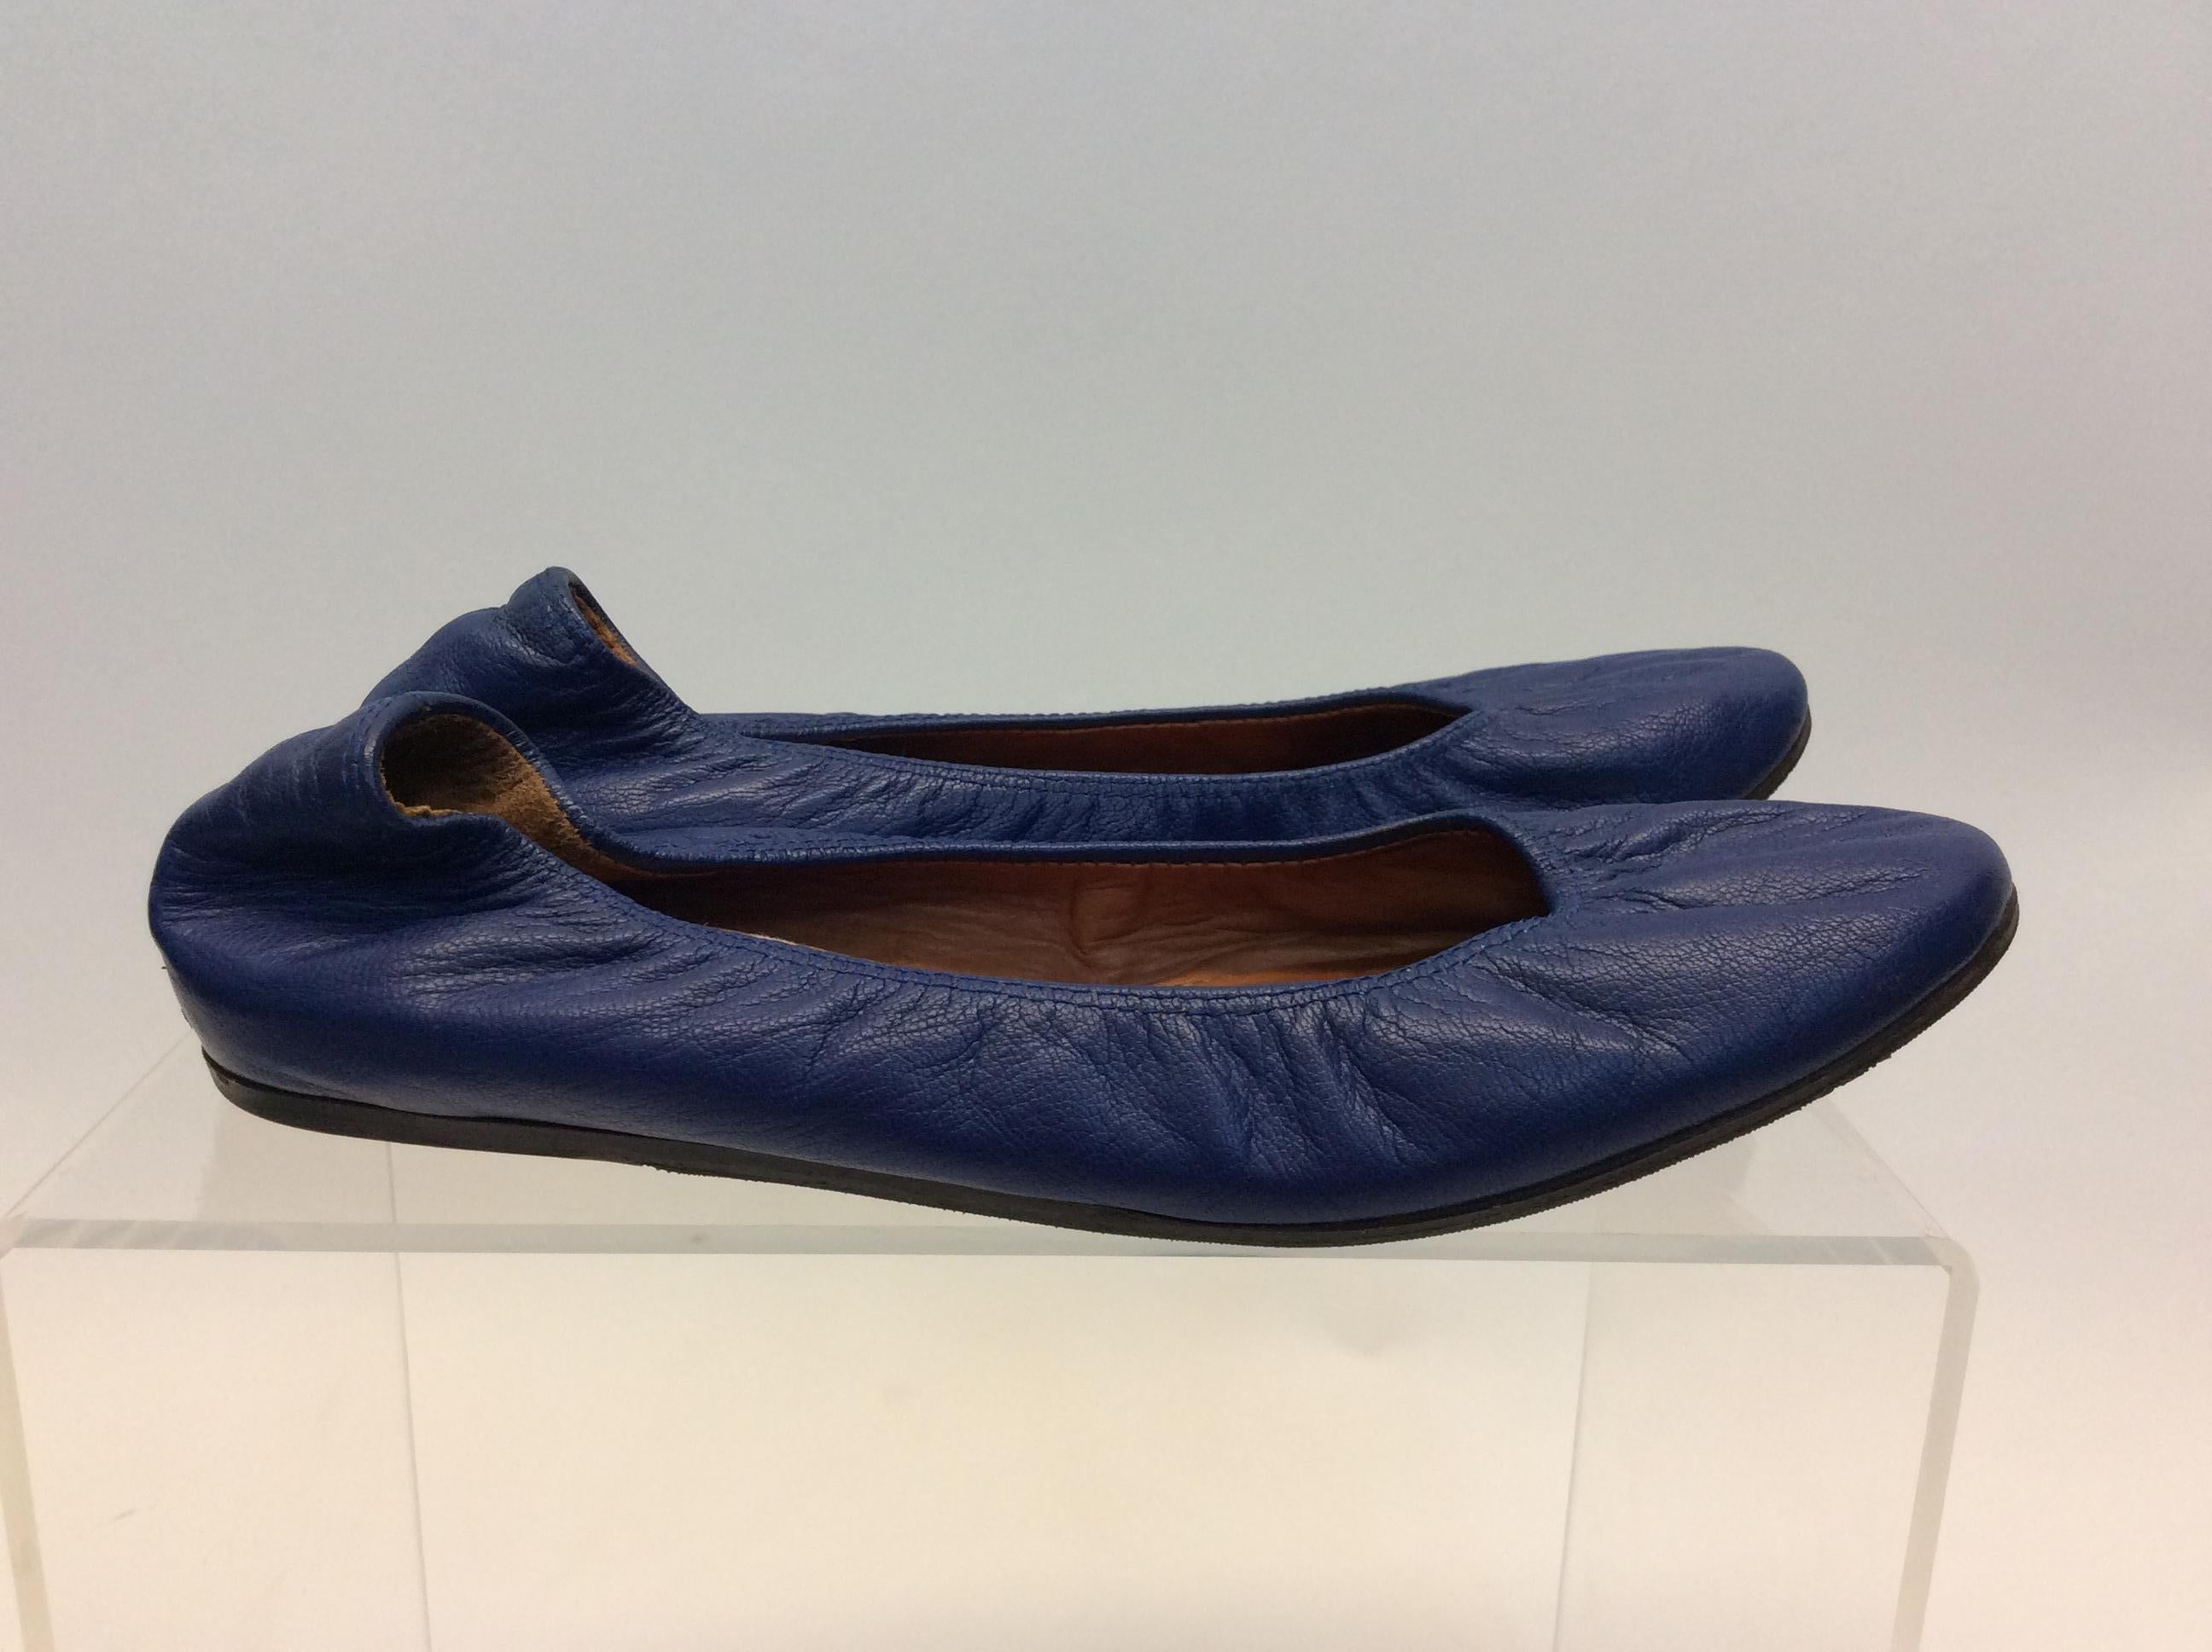 Lanvin Blue Leather Flats In Good Condition For Sale In Narberth, PA